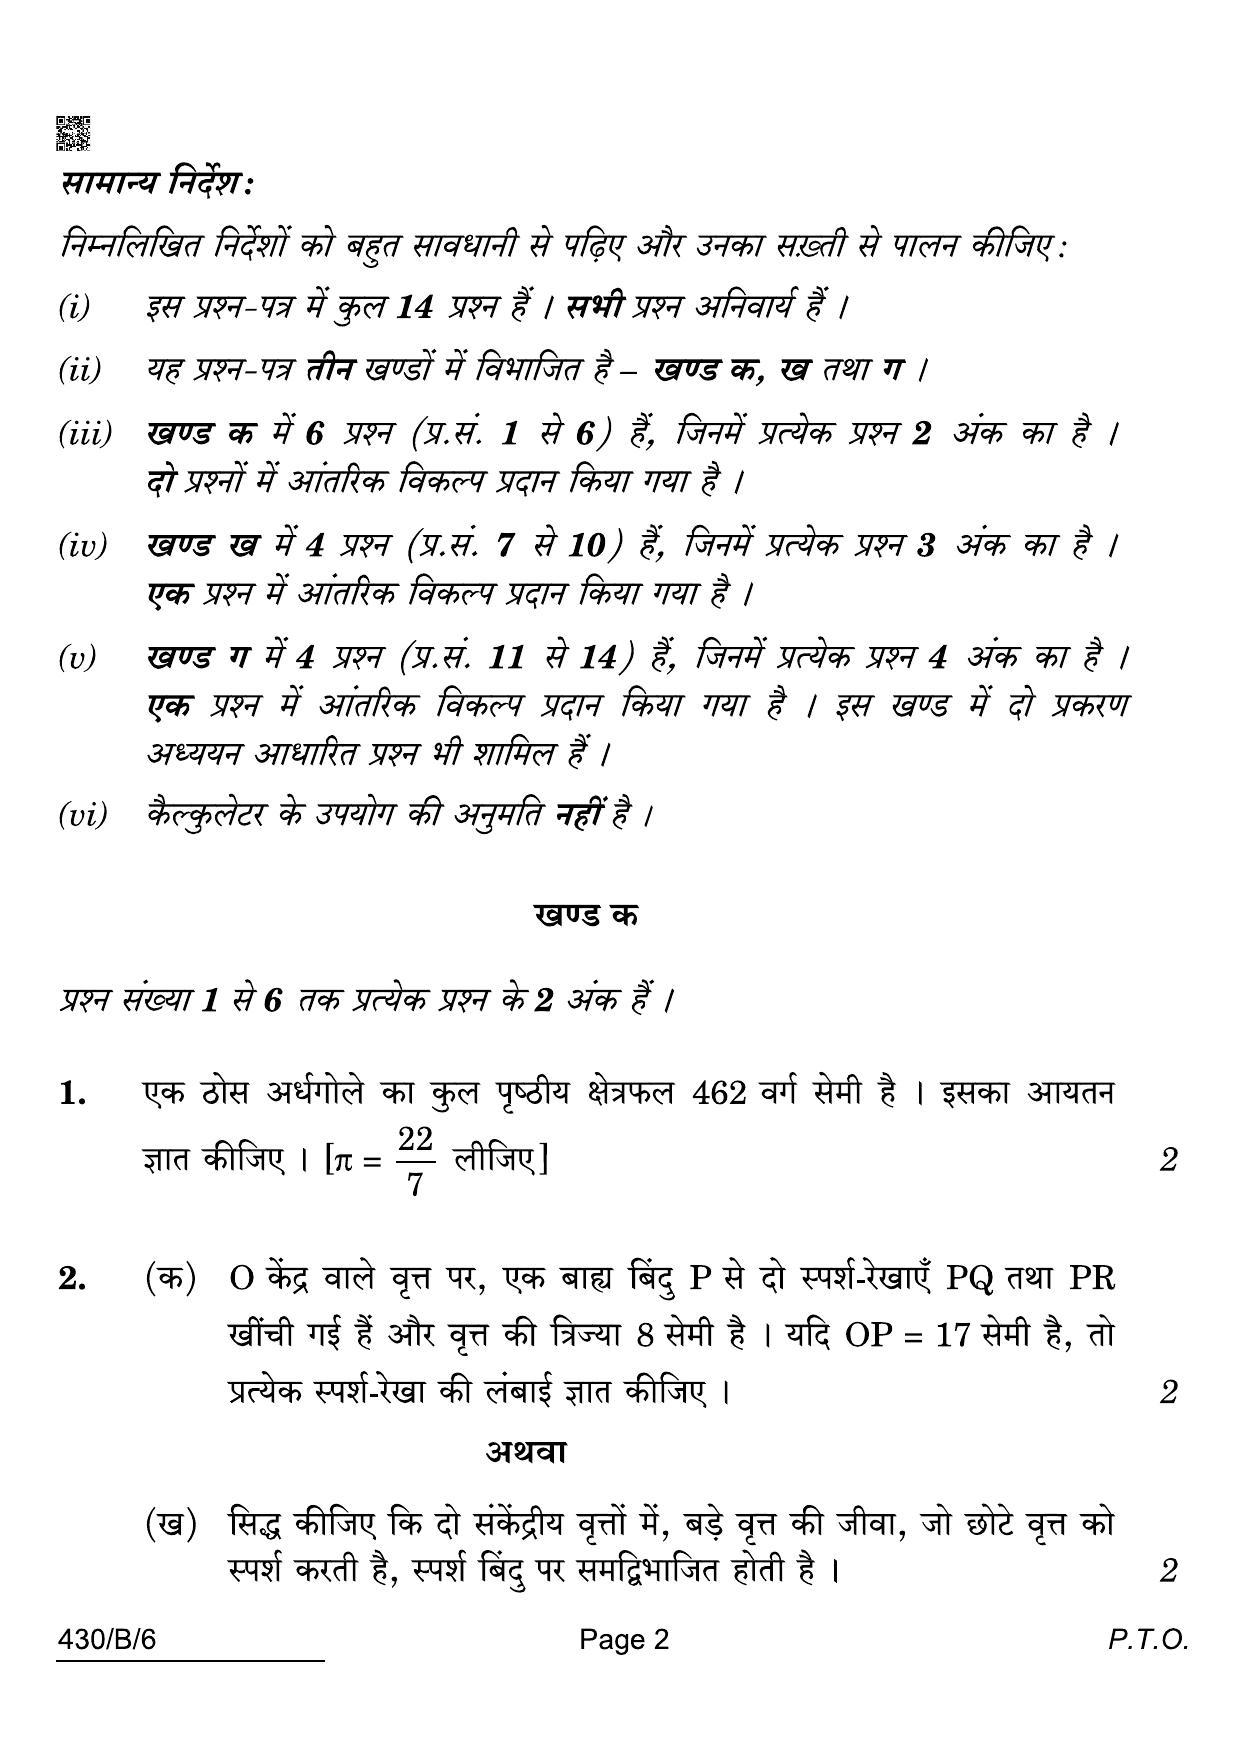 CBSE Class 10 430-B-6 Maths Basic Blind 2022 Compartment Question Paper - Page 2